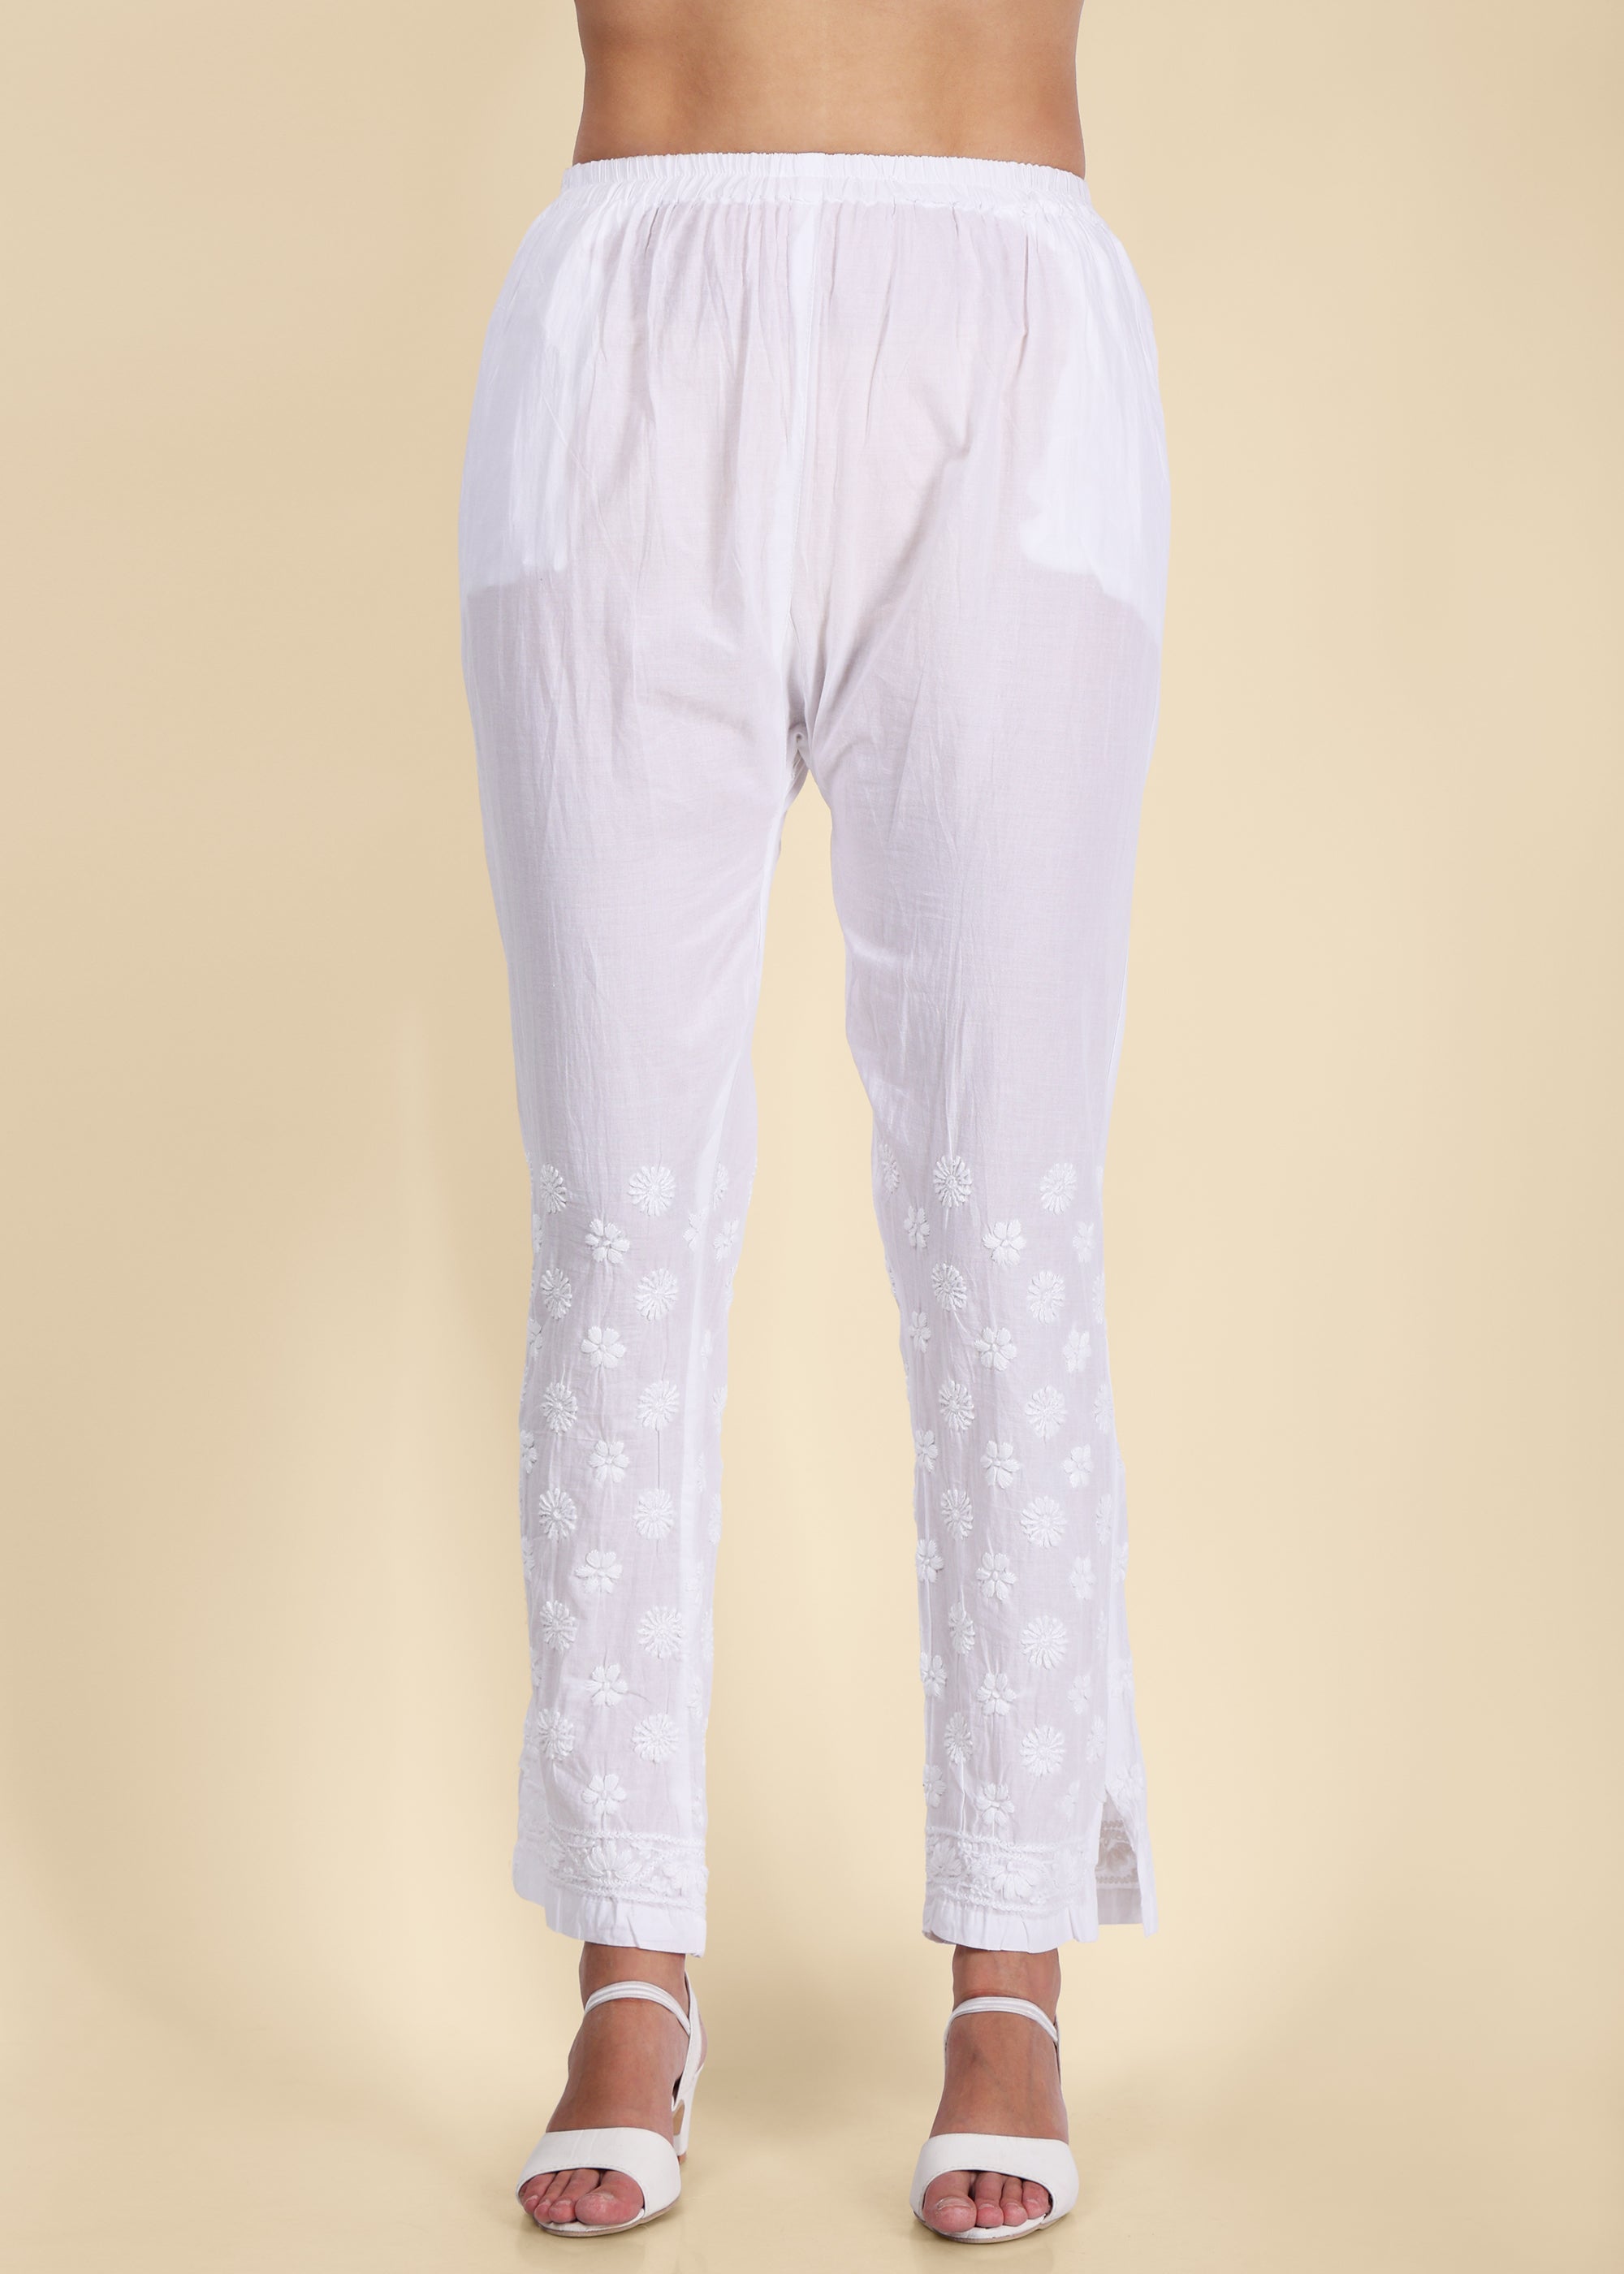 Chikankari stretchable pants with side embroidery style.